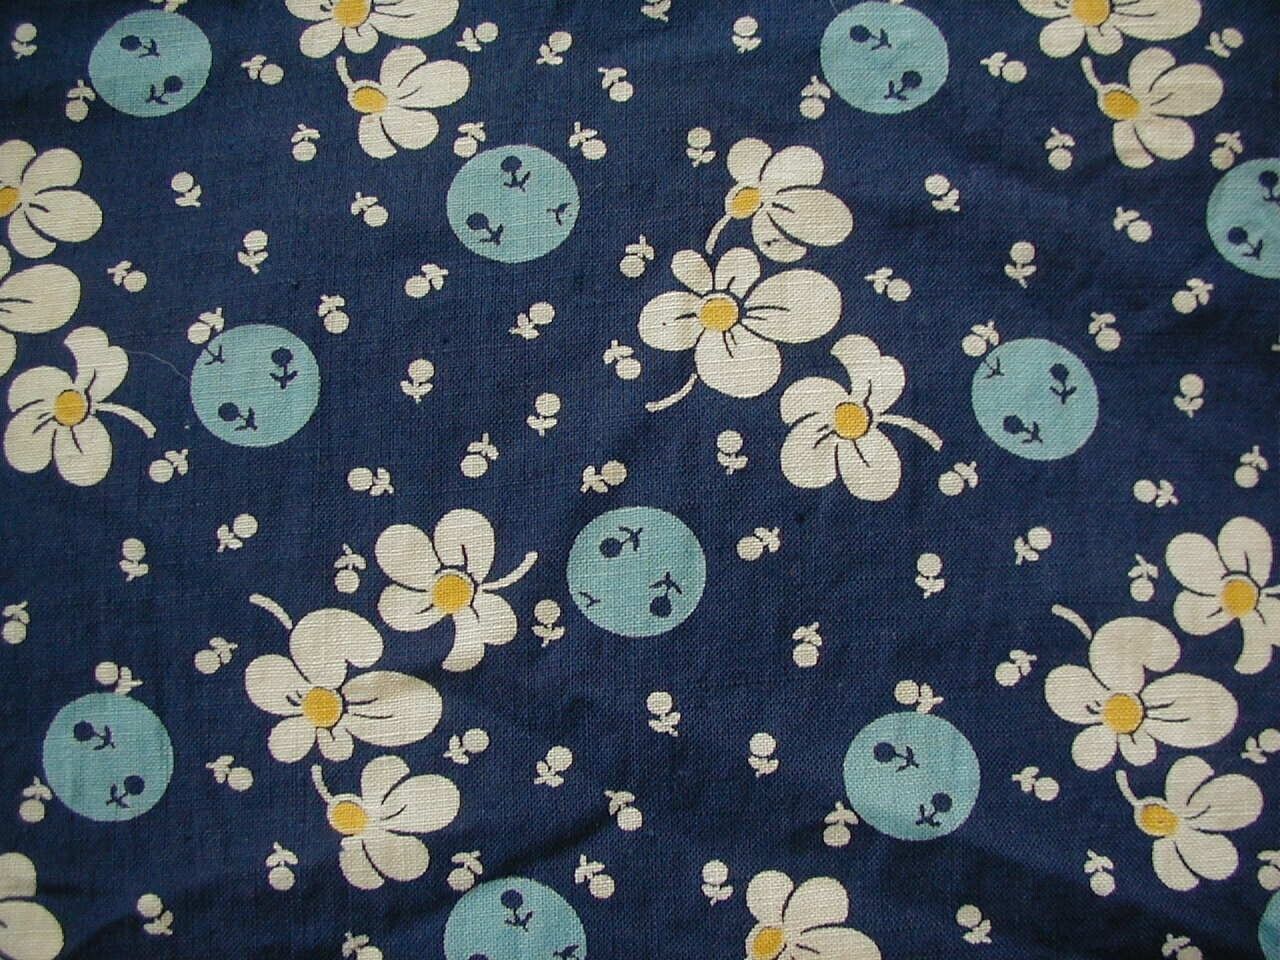 vintage fabric feedsack style remnant blue white floral quilting fabric scrap